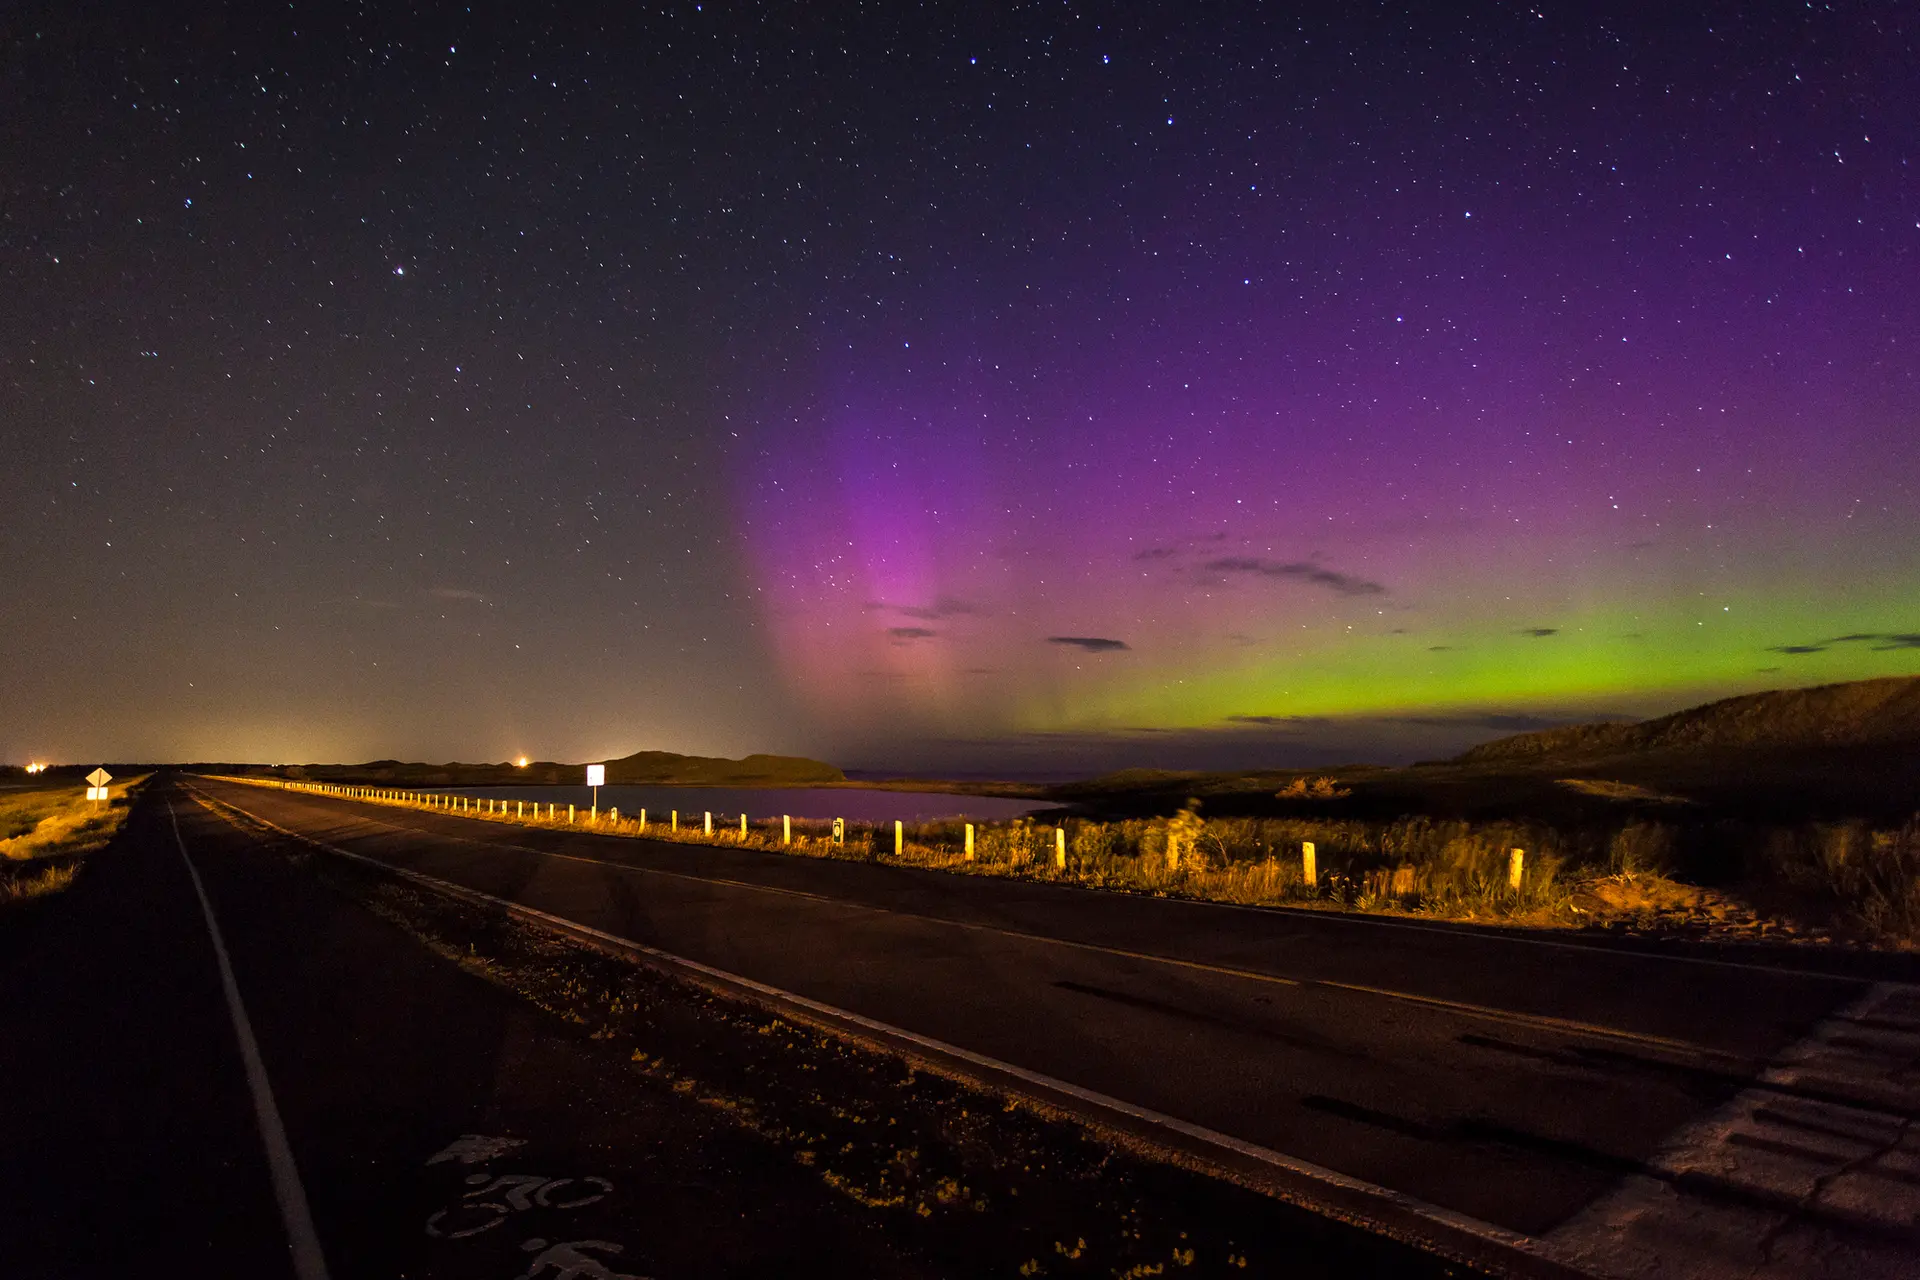 Purple and green northern lights in Prince Edward Island